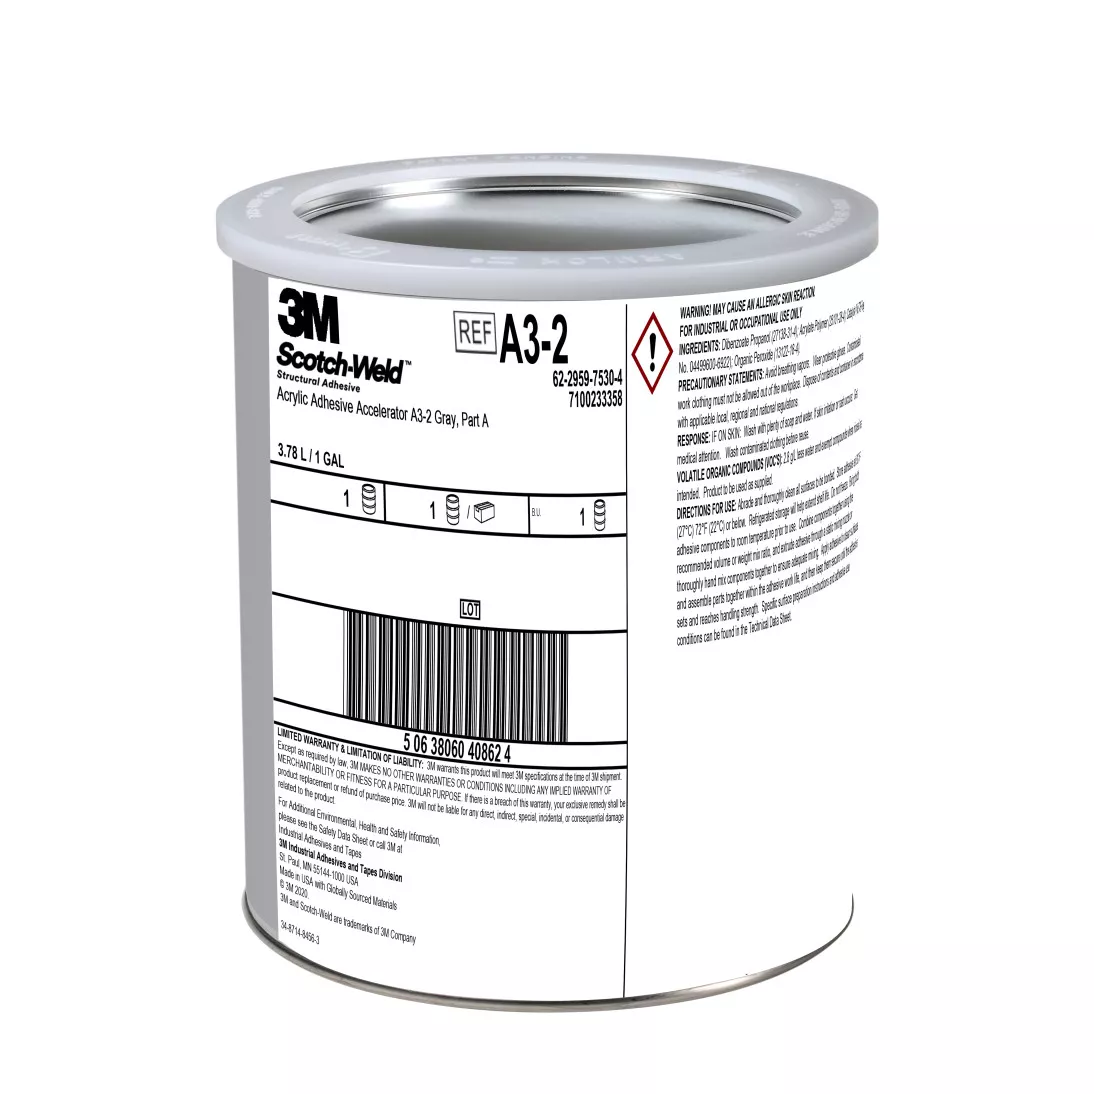 3M™ Scotch-Weld™ Acrylic Adhesive Accelerator A3-2, Green, Part A, 1
Gallon Can, 1/case